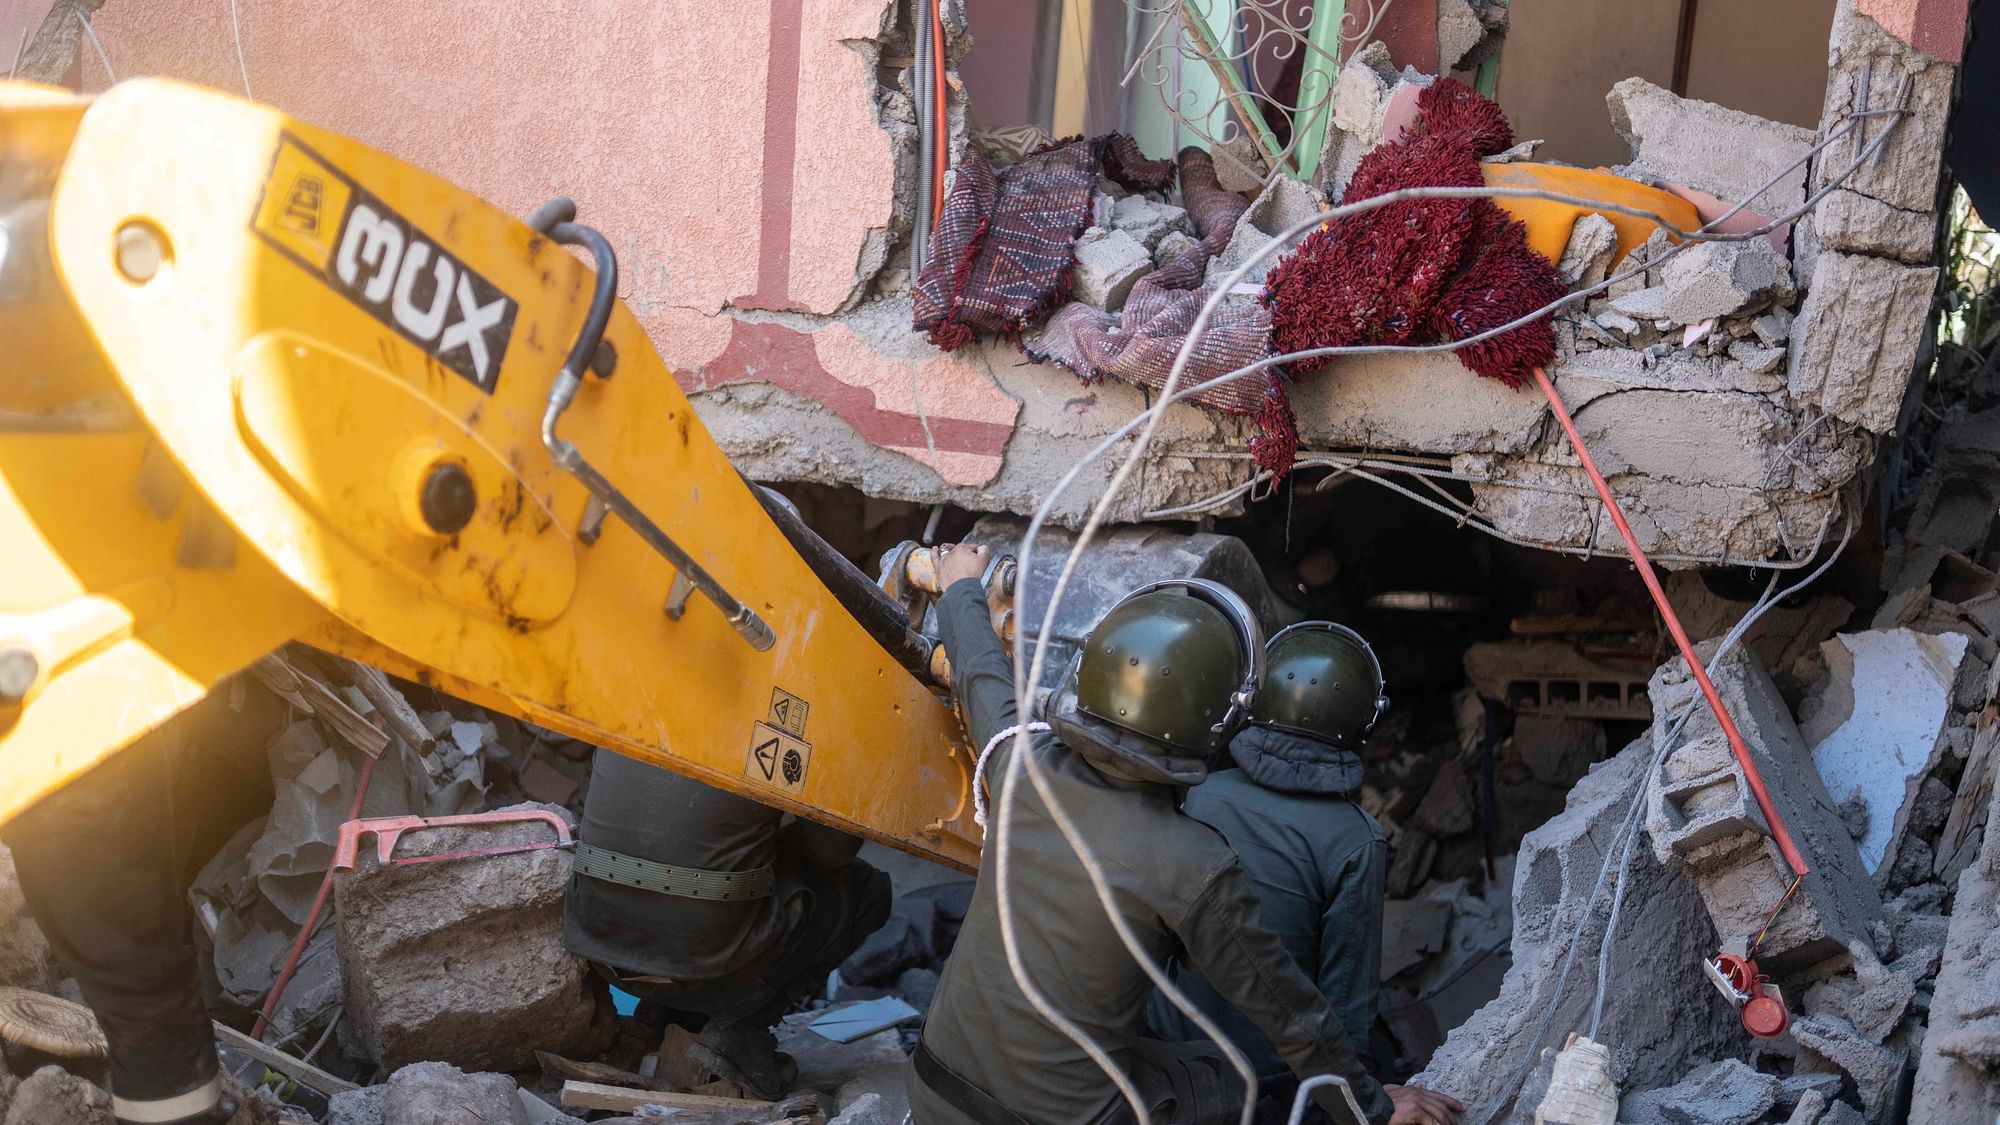 <div class="paragraphs"><p>Security forces take part in a rescue operation after an earthquake, in Moulay Ibrahim village, near Marrakech, Morocco, on Saturday, 9 September.&nbsp;</p></div>